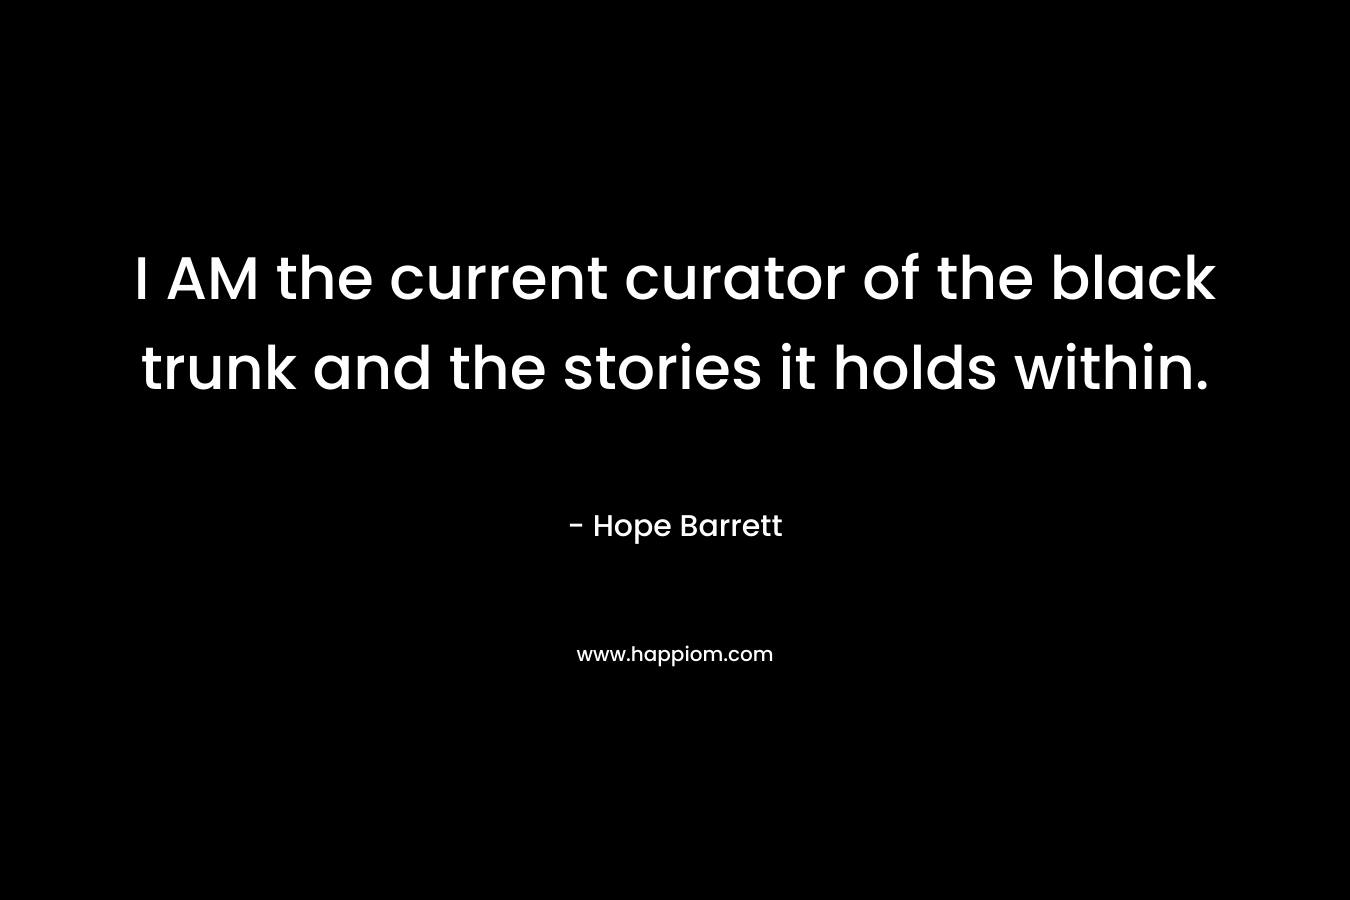 I AM the current curator of the black trunk and the stories it holds within. – Hope Barrett